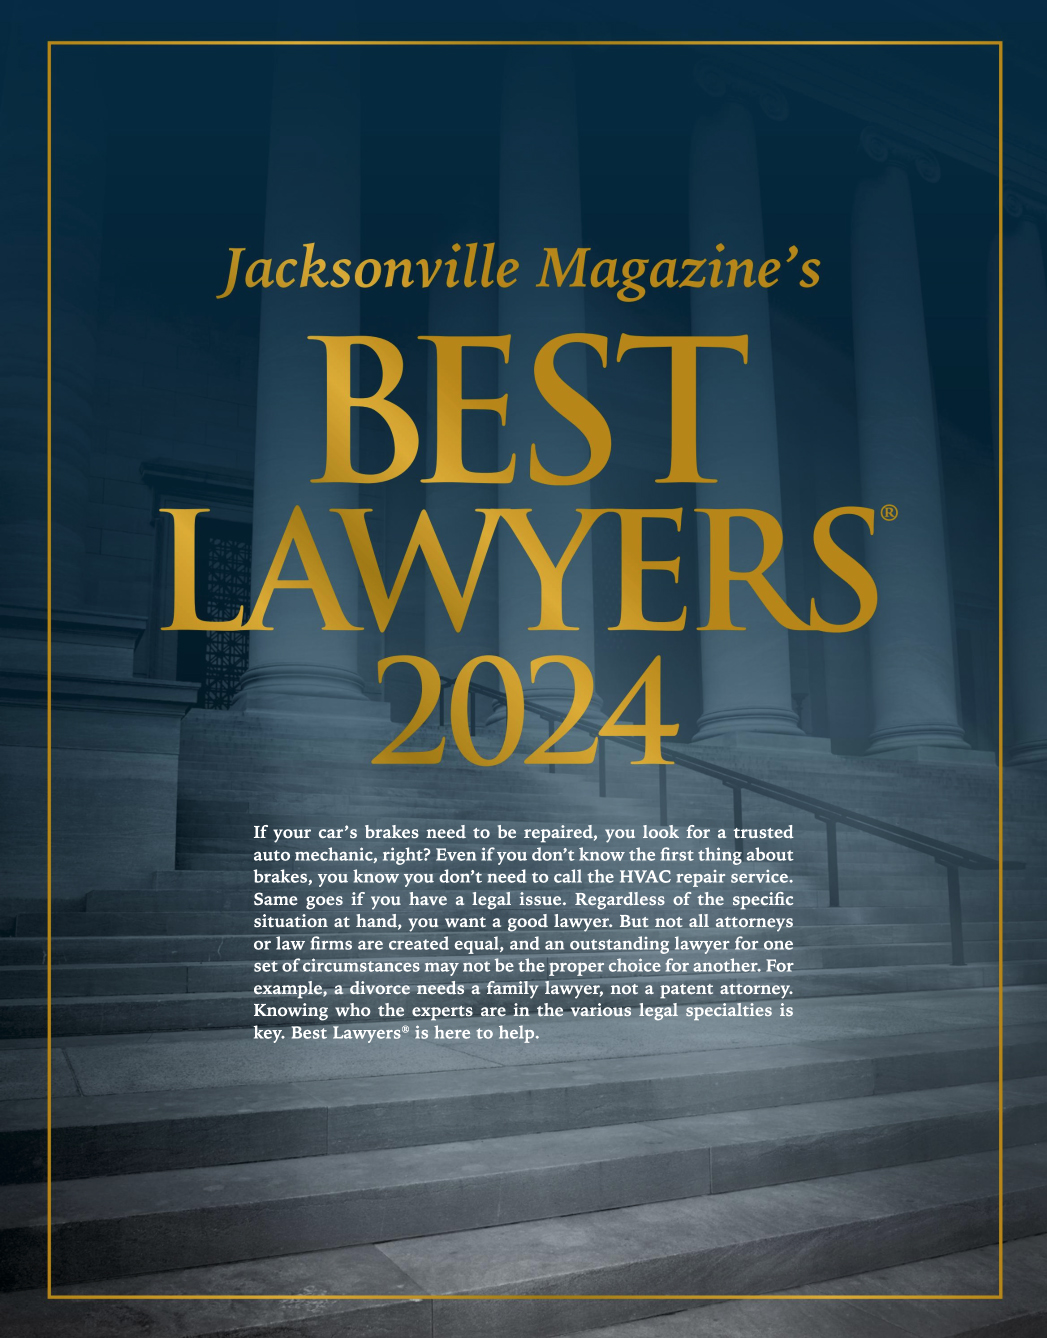 A promotional cover for "Jacksonville Magazine's Best Lawyers 2024," featuring bold text over an image of classical stone steps and columns, symbolizing law and justice, sponsored by Ansbacher Law